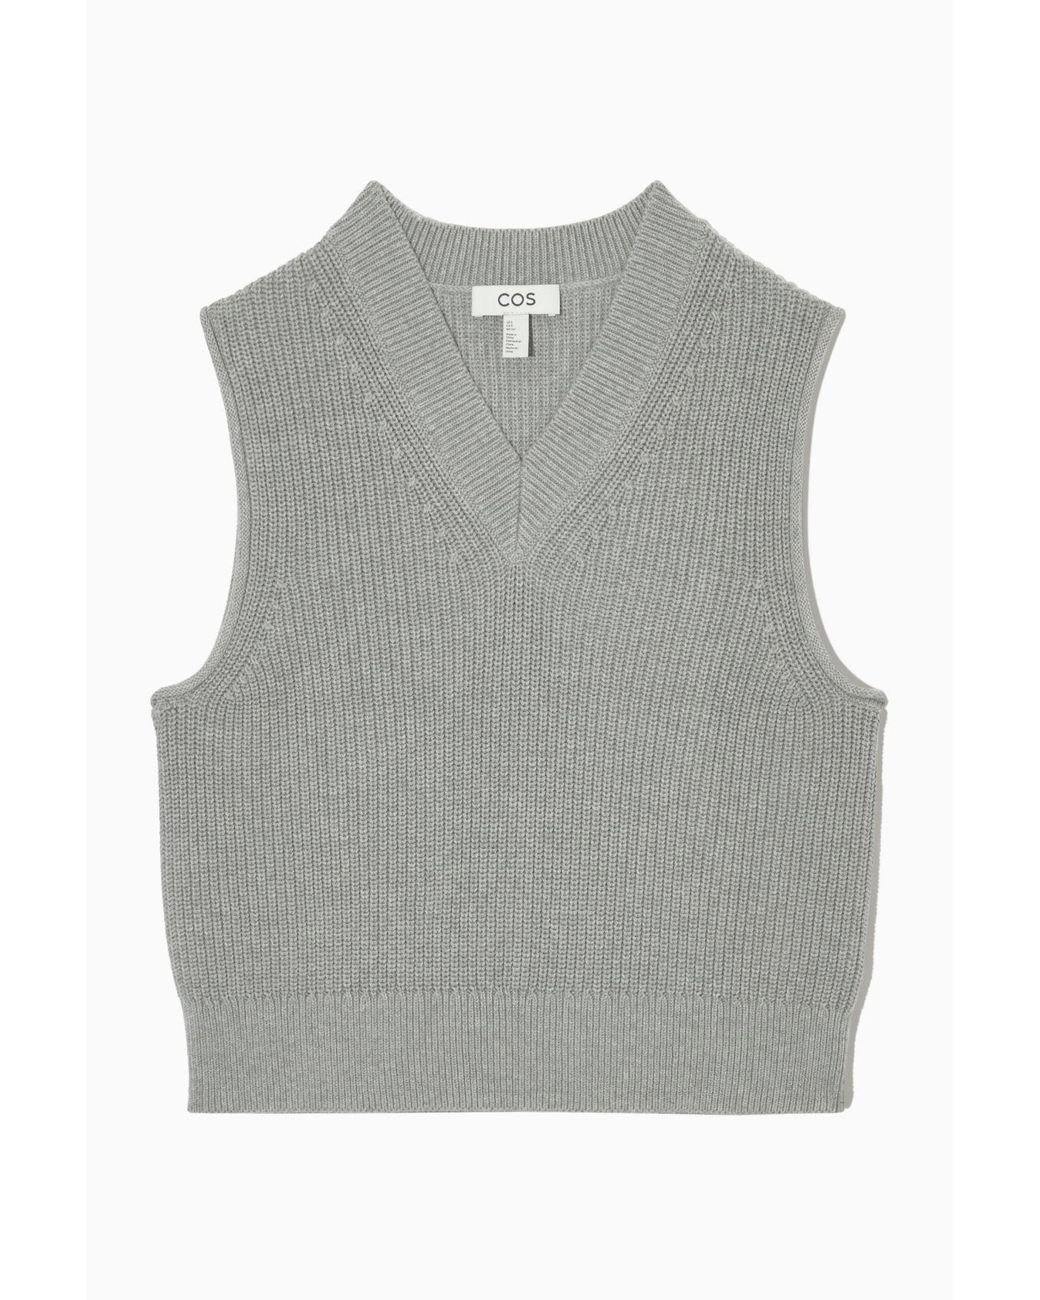 COS Chunky Knit Vest in Gray | Lyst